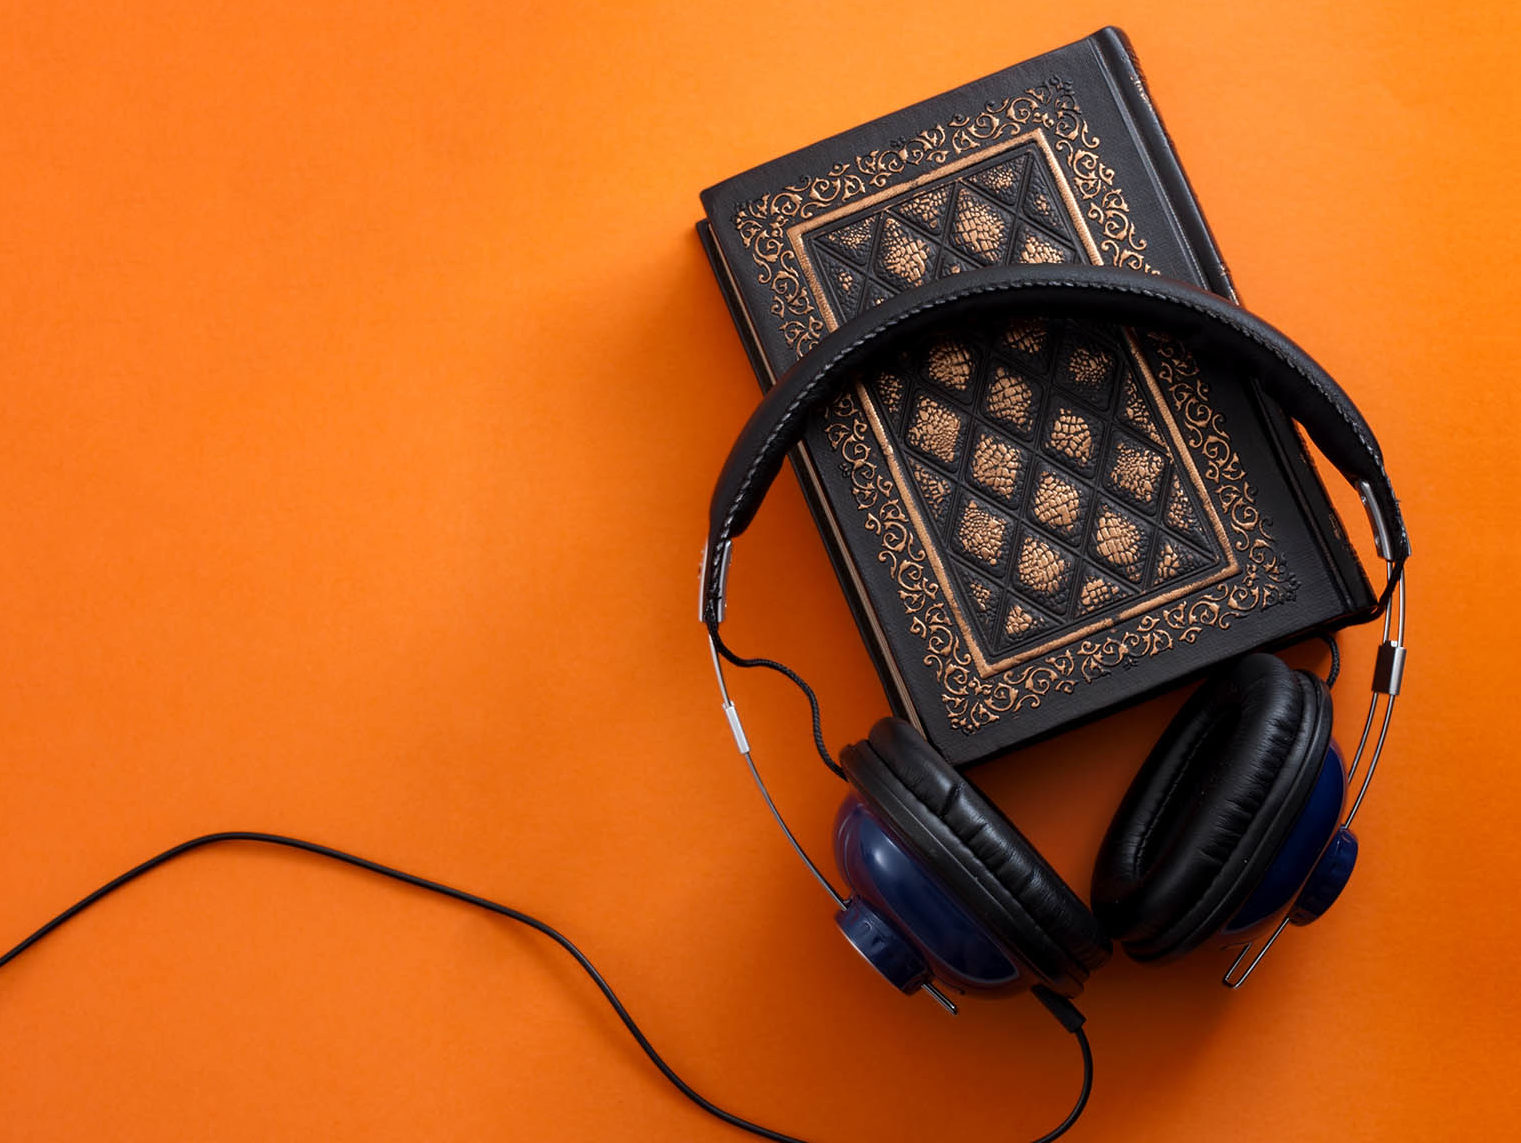 5 Podcasts that Make Me a Smarter CEO